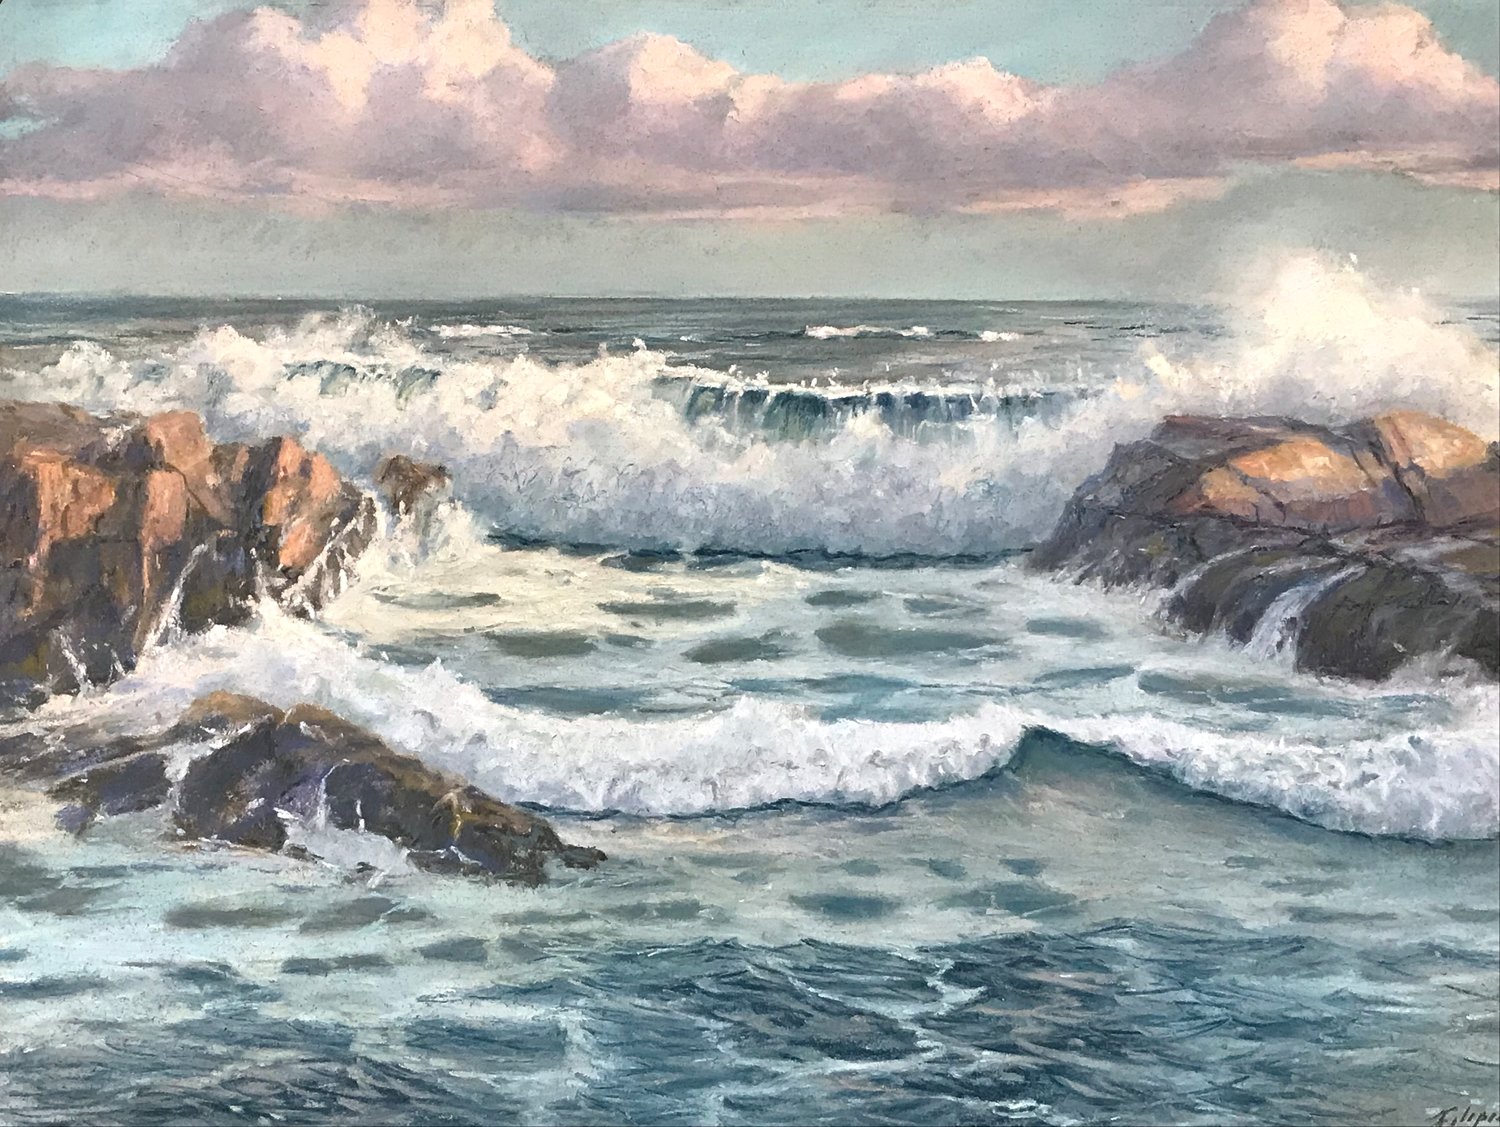 "Just Before the Twilight" is a pastel by Michael Filipiak.